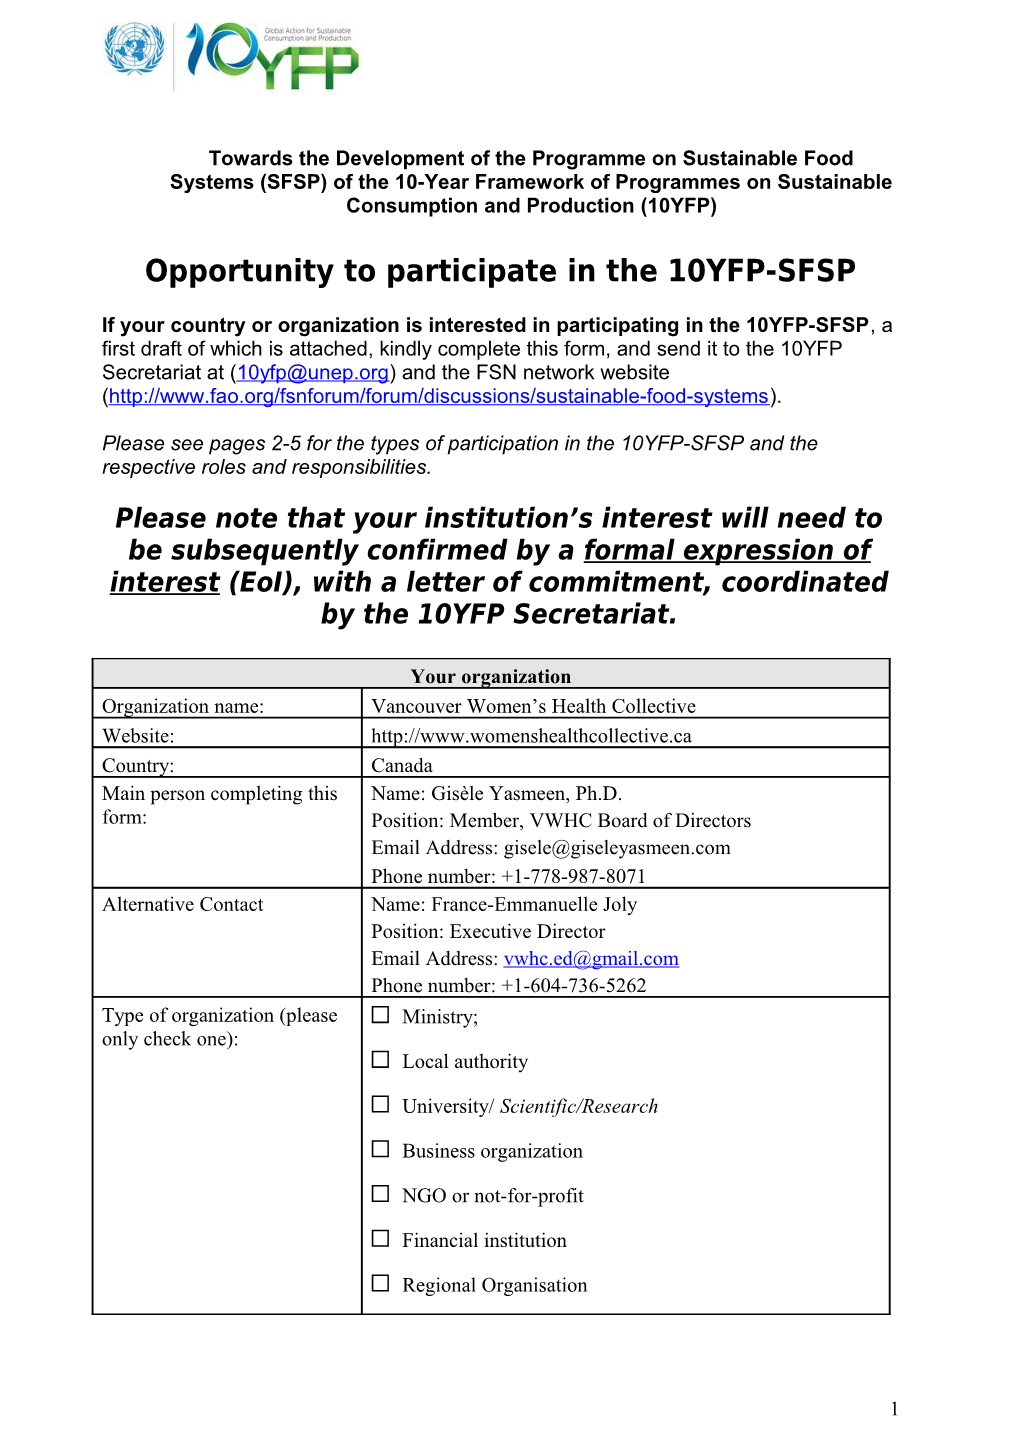 Opportunity to Participate in the 10YFP-SFSP